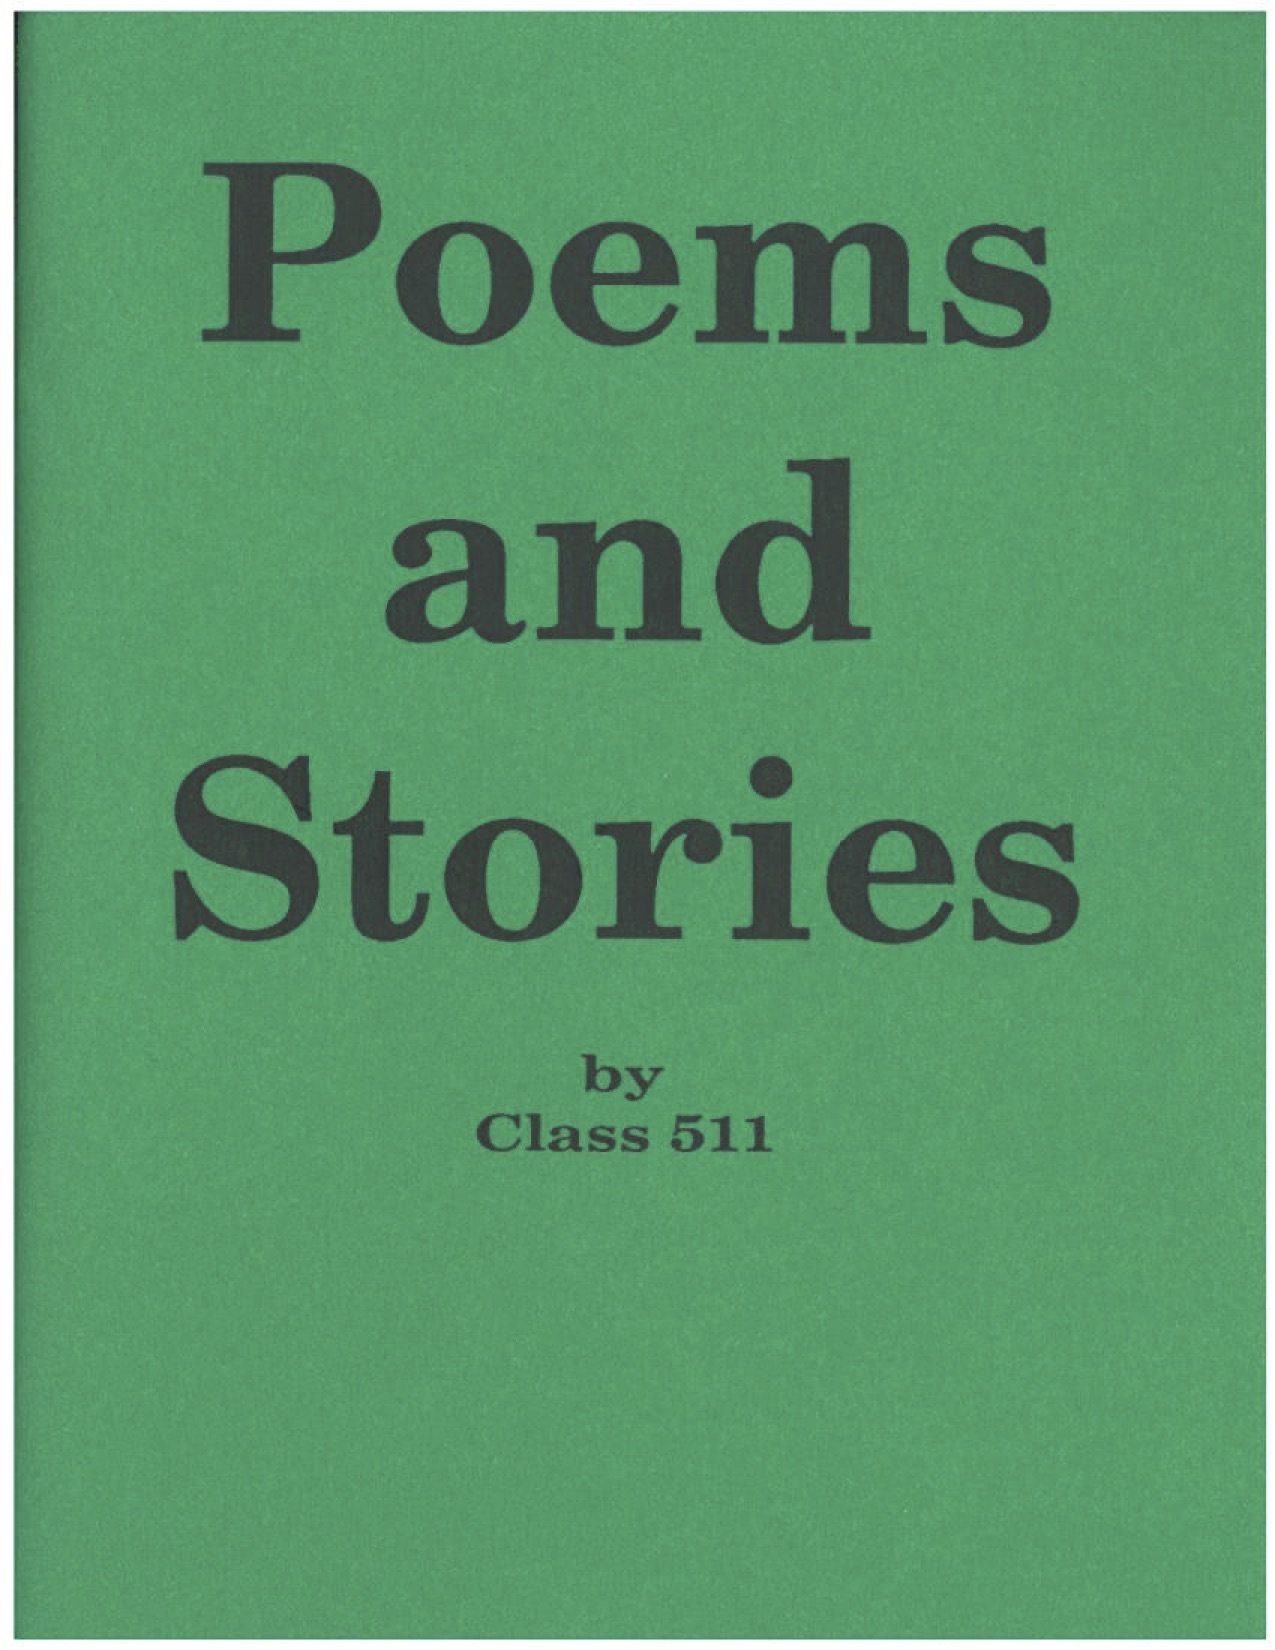 Poems and Stories by Class 511